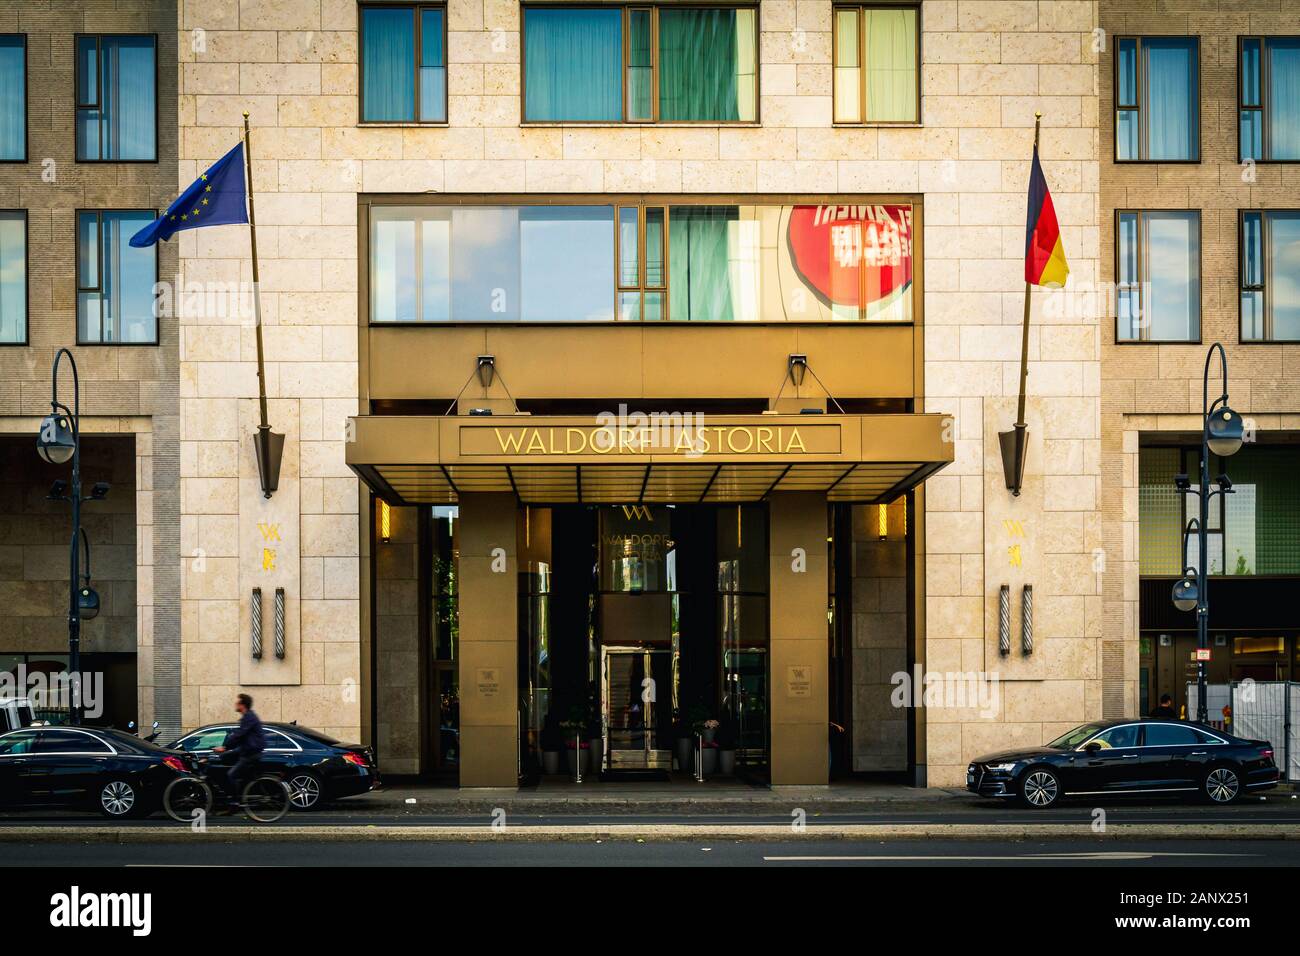 Berlin, Germany - May 30, 2019: The entrance of the luxury hotel Waldorf Astoria housed in the skyscraper Zoofenster at Kurfürstendamm Stock Photo